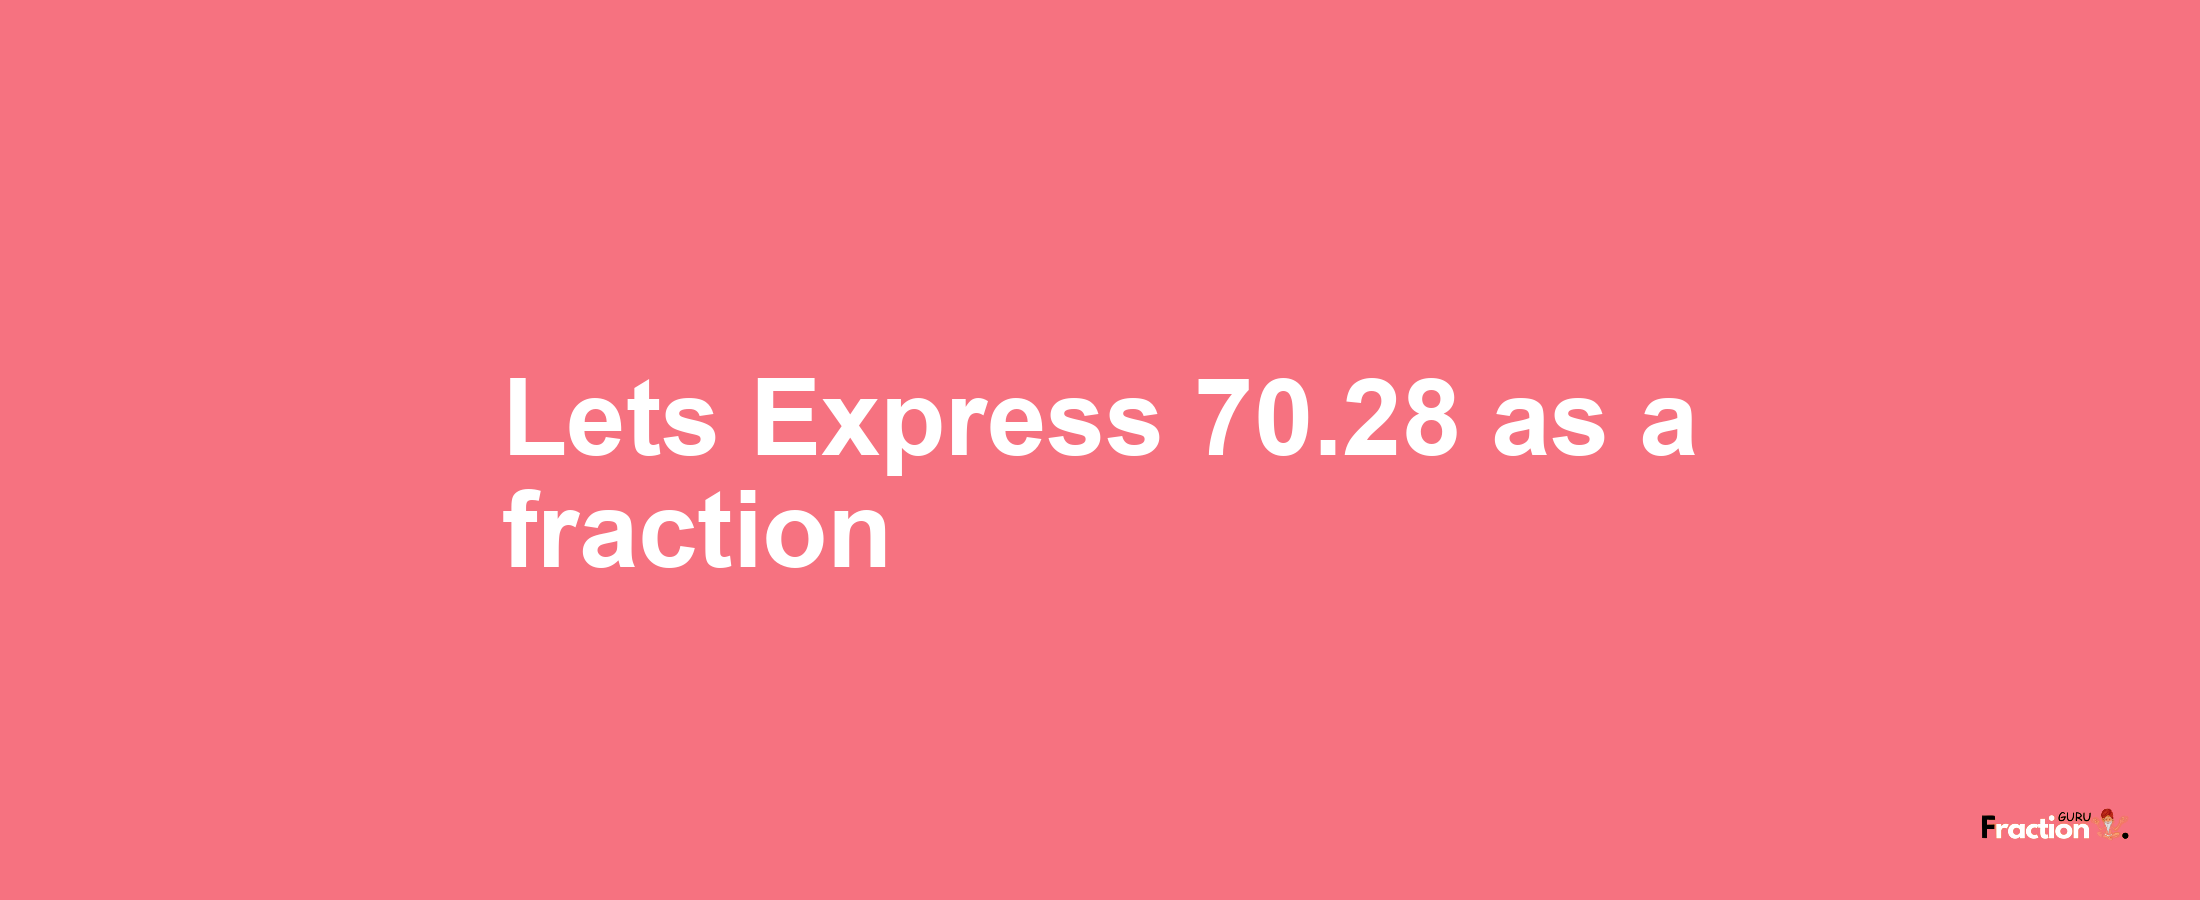 Lets Express 70.28 as afraction